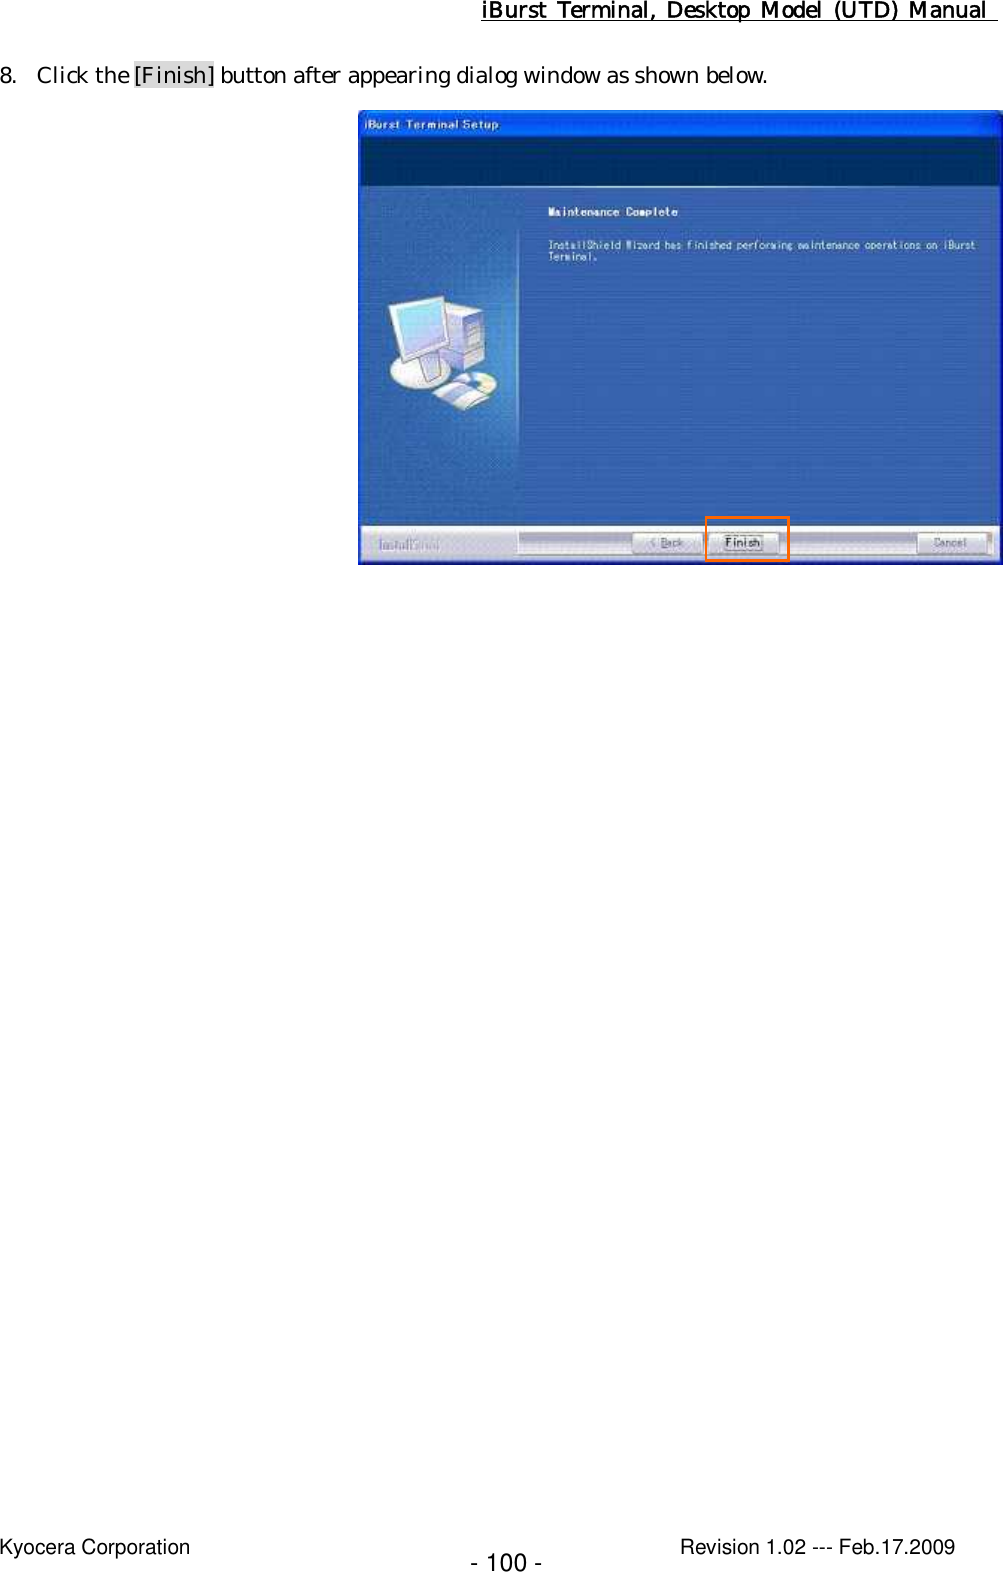 iBurst  Terminal, Desktop  Model  (UTD)  Manual    Kyocera Corporation                                                                                              Revision 1.02 --- Feb.17.2009 - 100 - 8. Click the [Finish] button after appearing dialog window as shown below.   